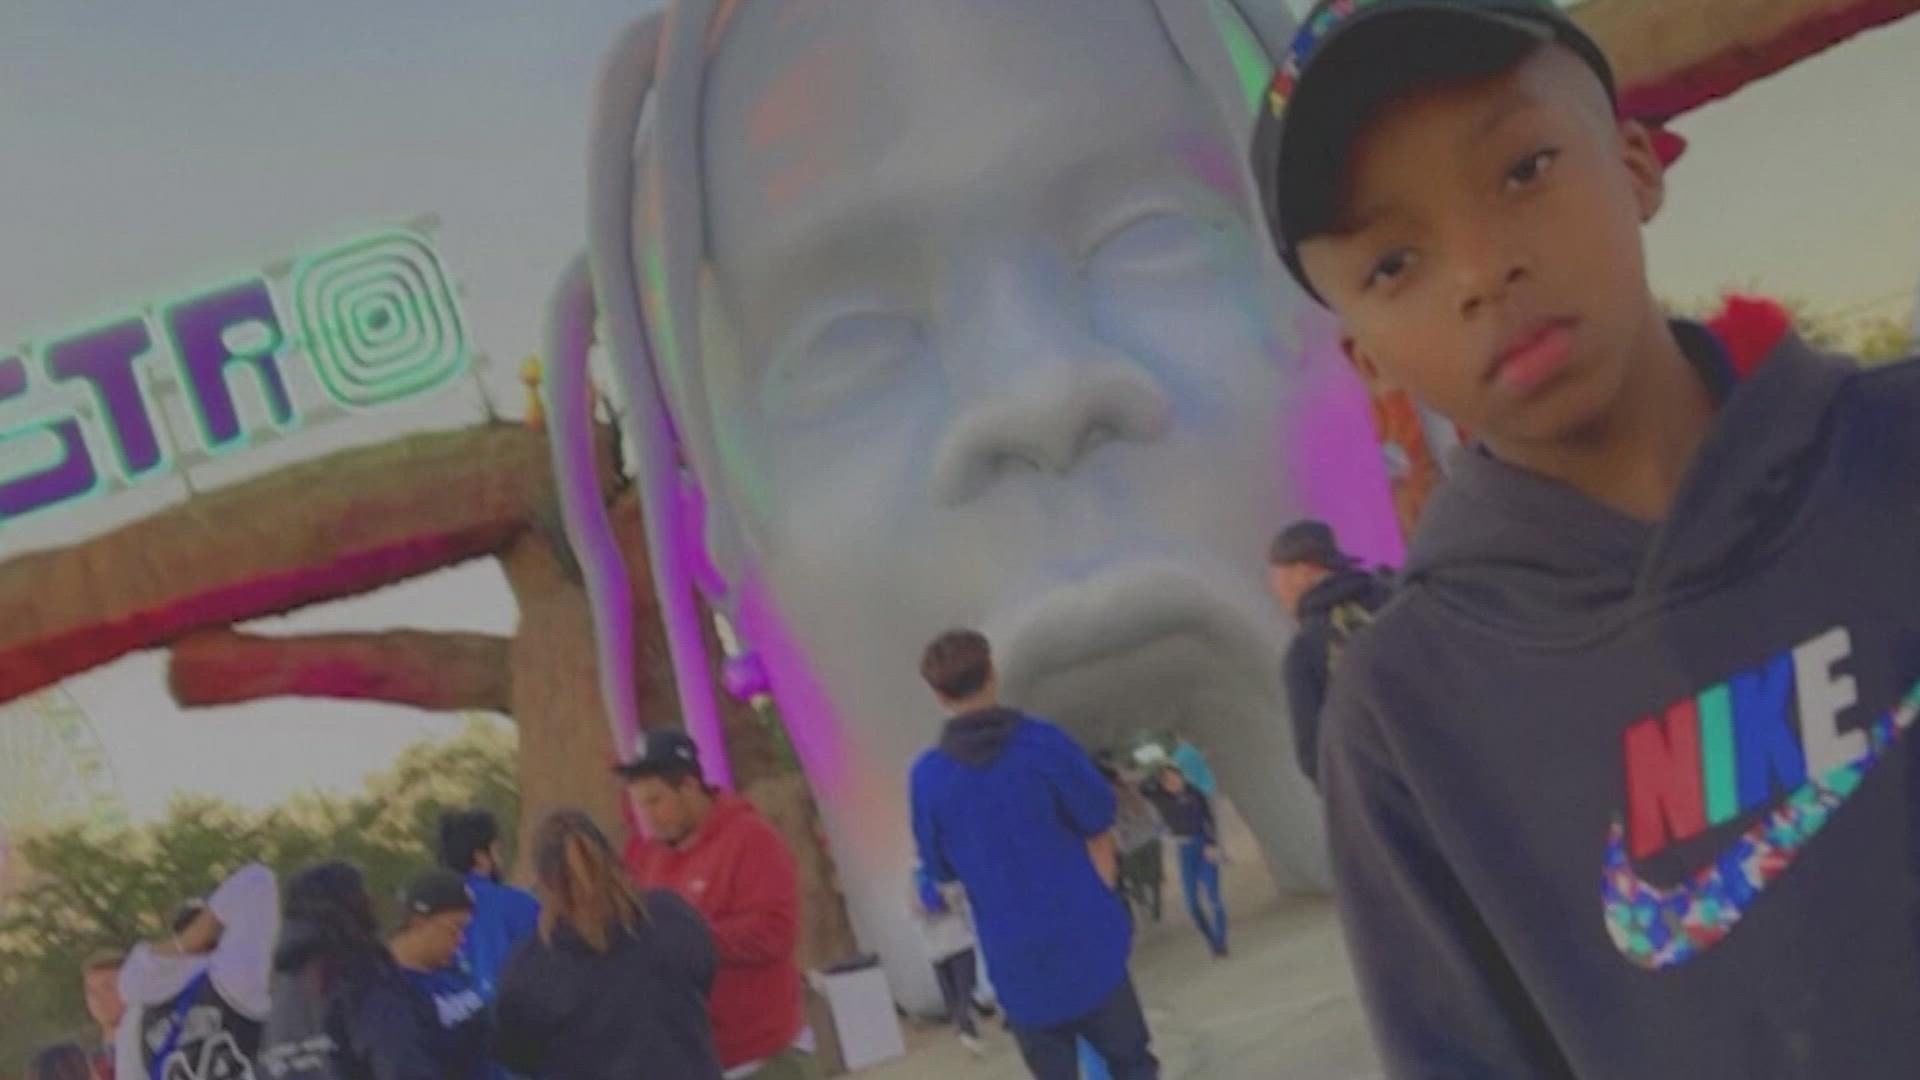 The boy's aunt said he's is an outgoing performer who loves to sing and dance. Travis Scott is his favorite rapper so his dad Treston took him to the concert.